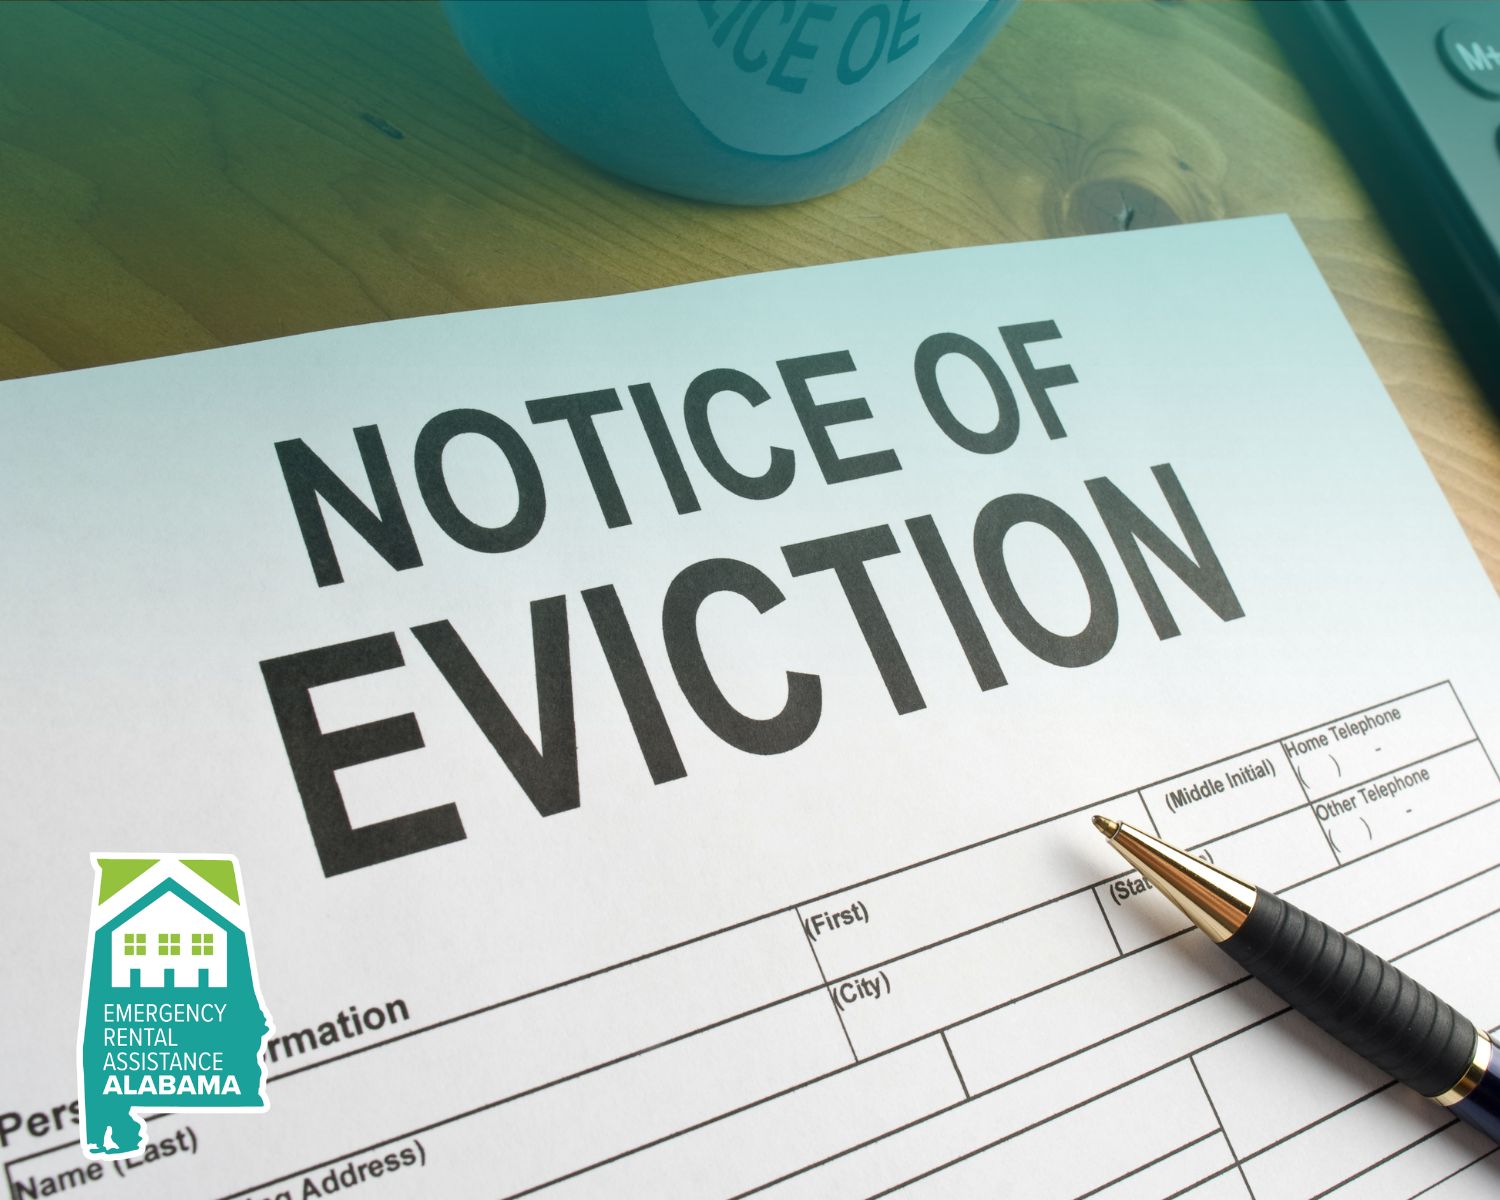 Emergency Rental Assistance Alabama Update: Imminent Eviction Prevention Initiative